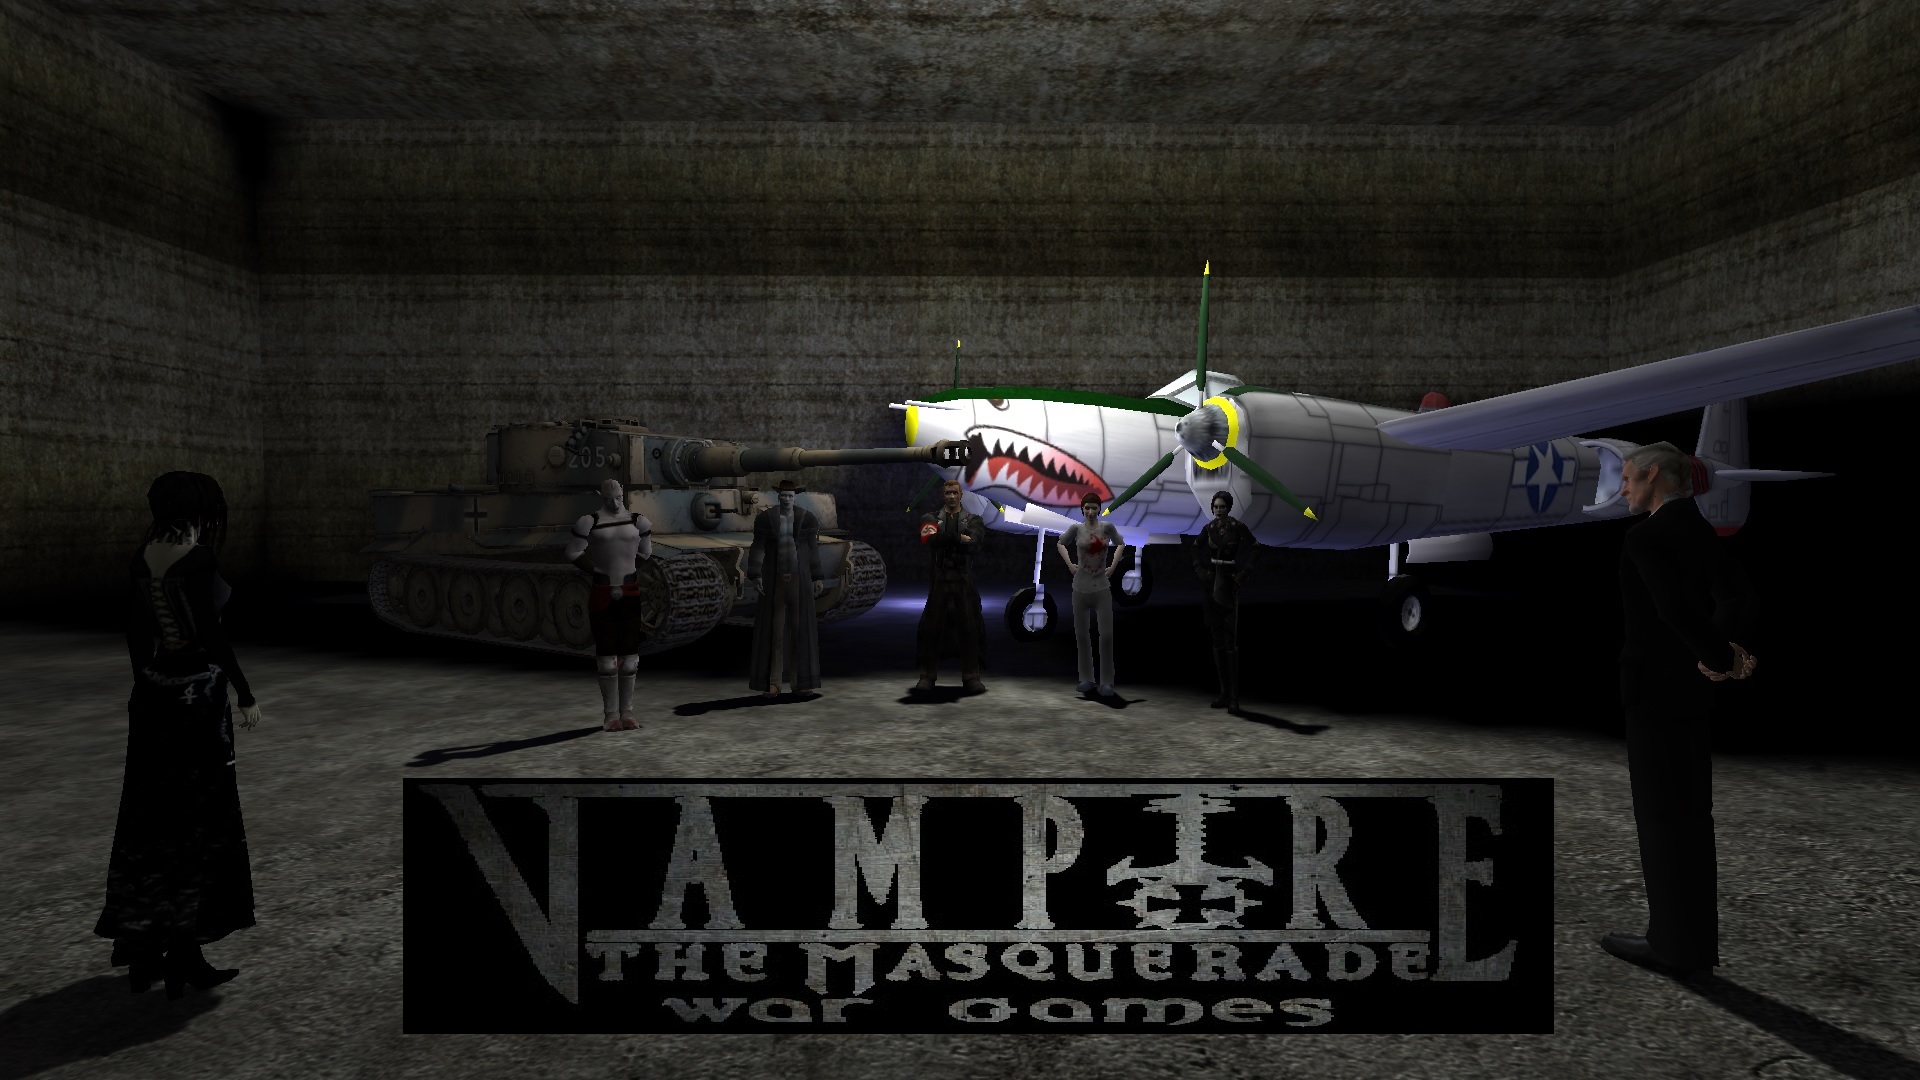 VTMB Official 1.2 Patch file - Vampire: The Masquerade – Bloodlines - ModDB